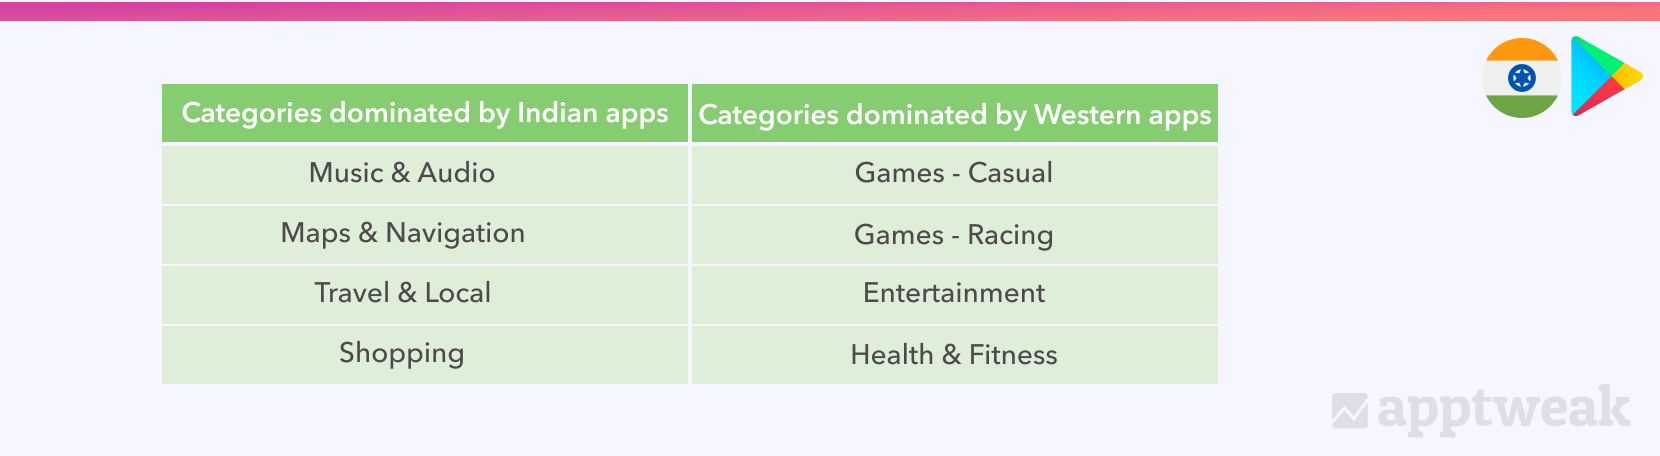 Categories dominated by Indian vs Western apps